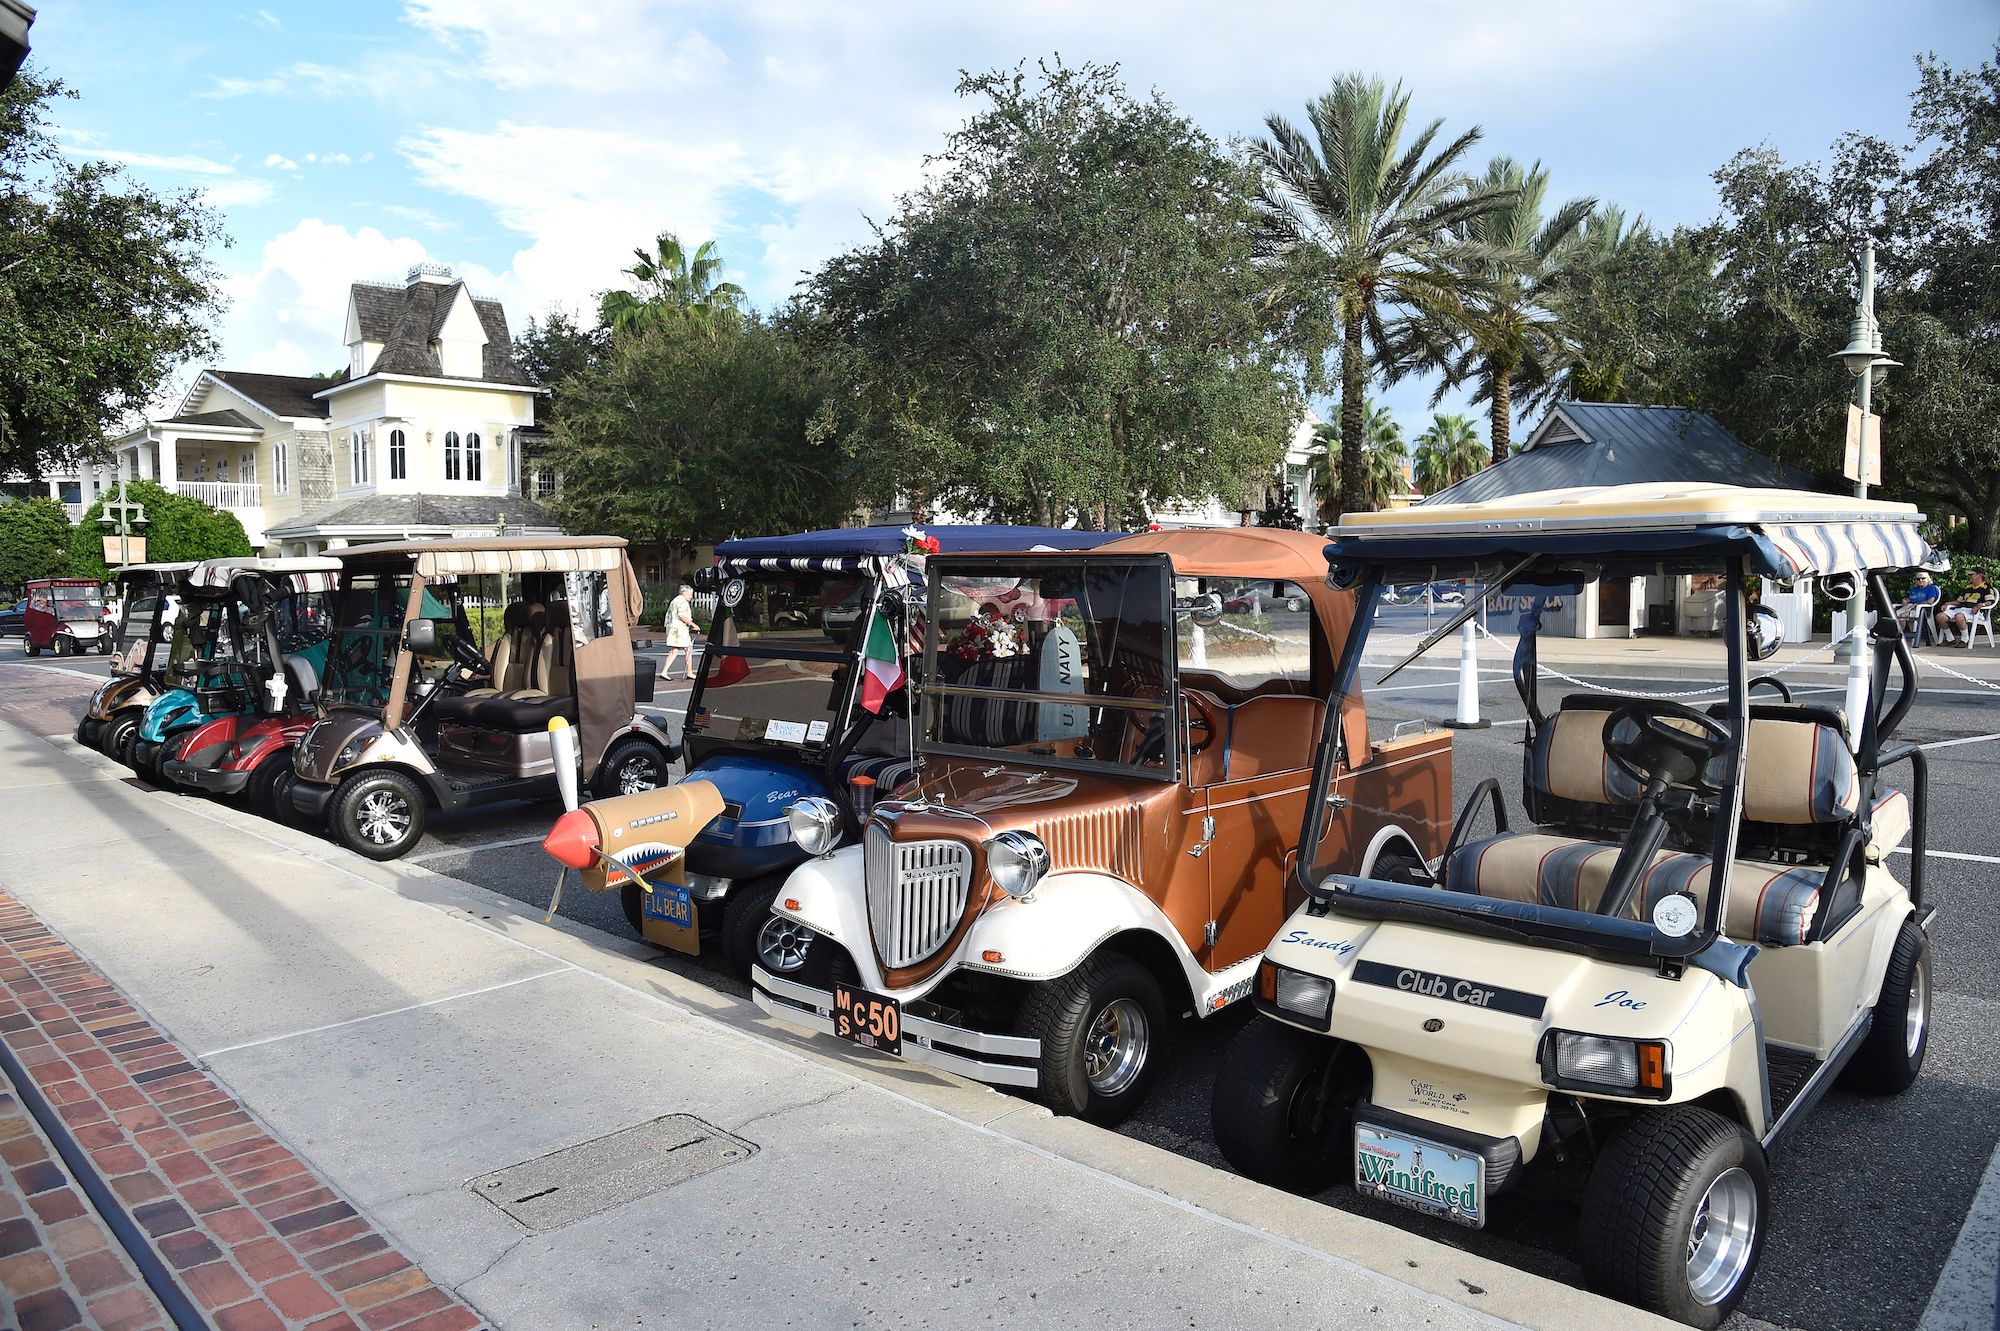 Golf carts line the street in the the Villages retirement community outside of Orlando, Florida, on October 4, 2016